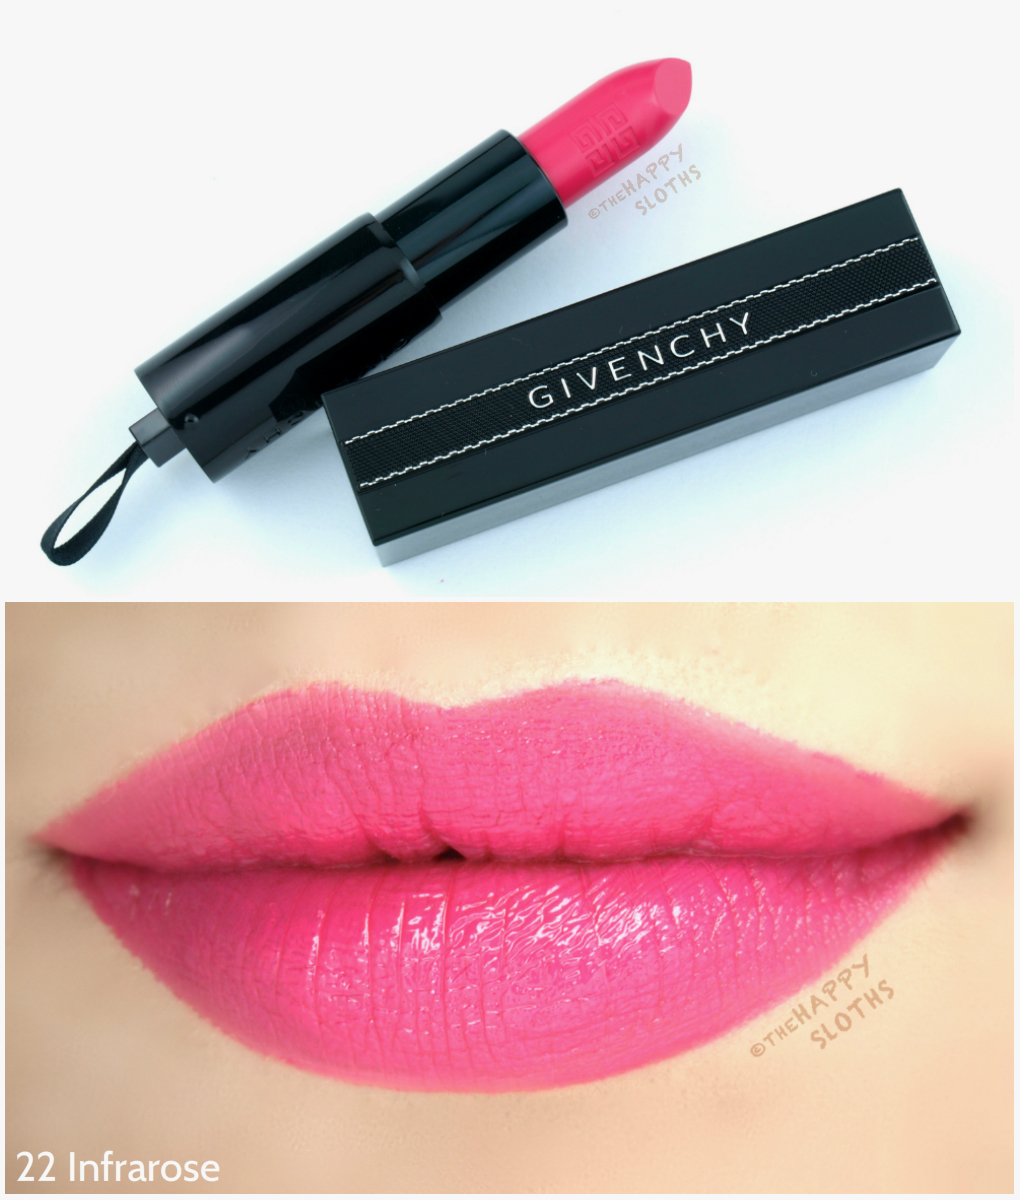 Givenchy Rouge Interdit Satin Lipsticks 22 Infrarose Review and Swatches